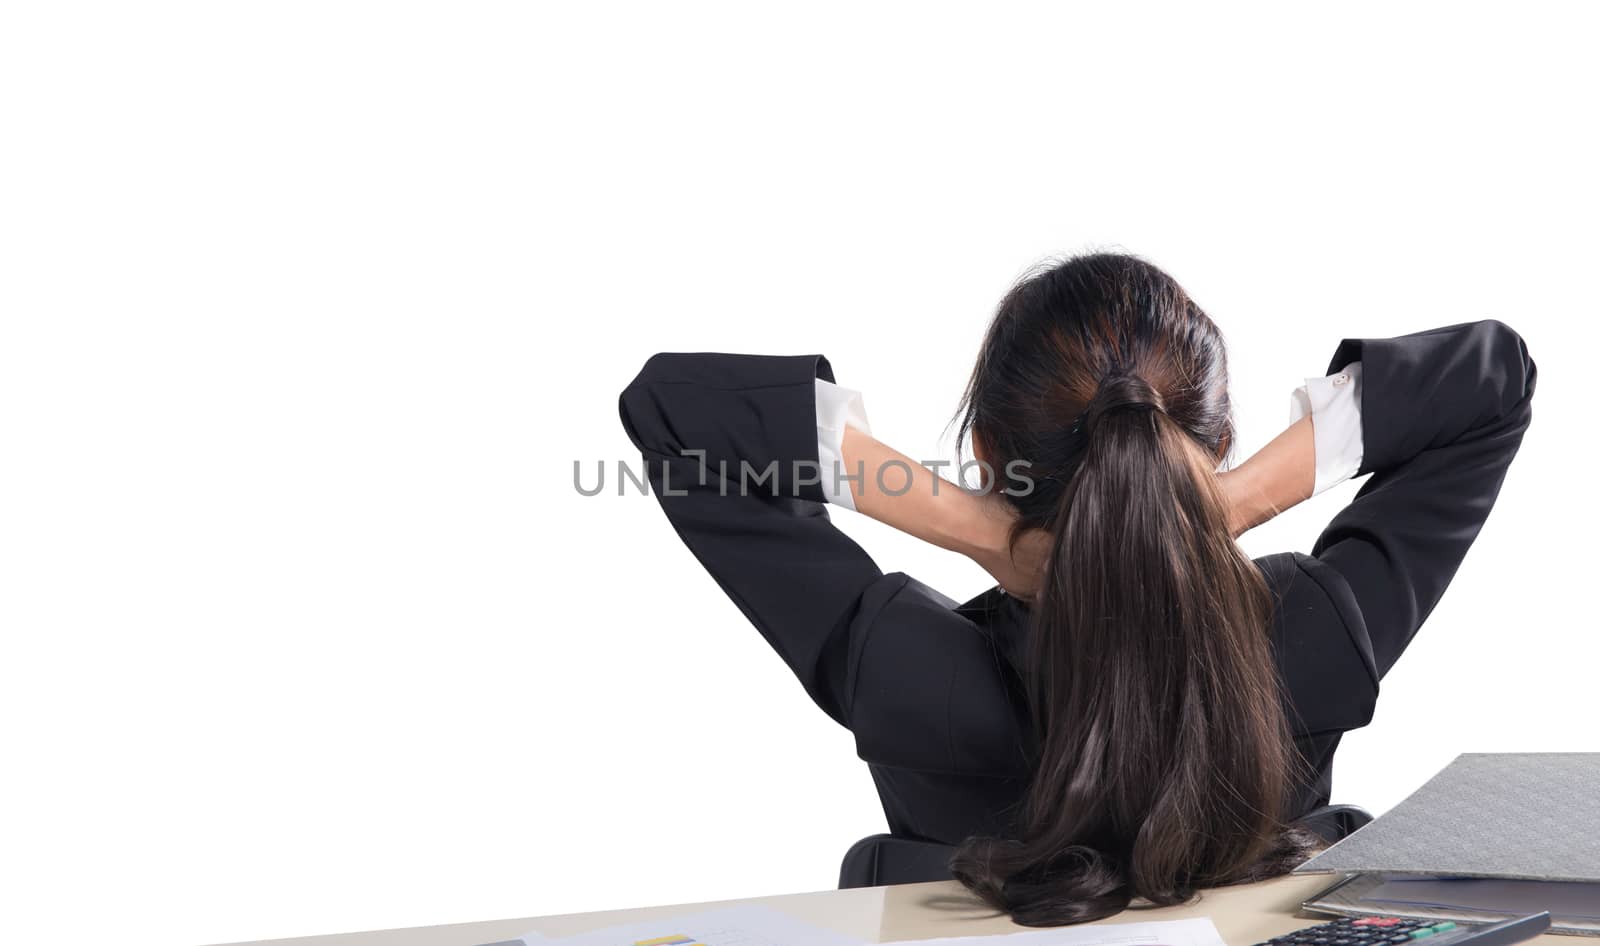 Closeup portrait of cute young relaxed business woman from behind with open hands behind her head on work space